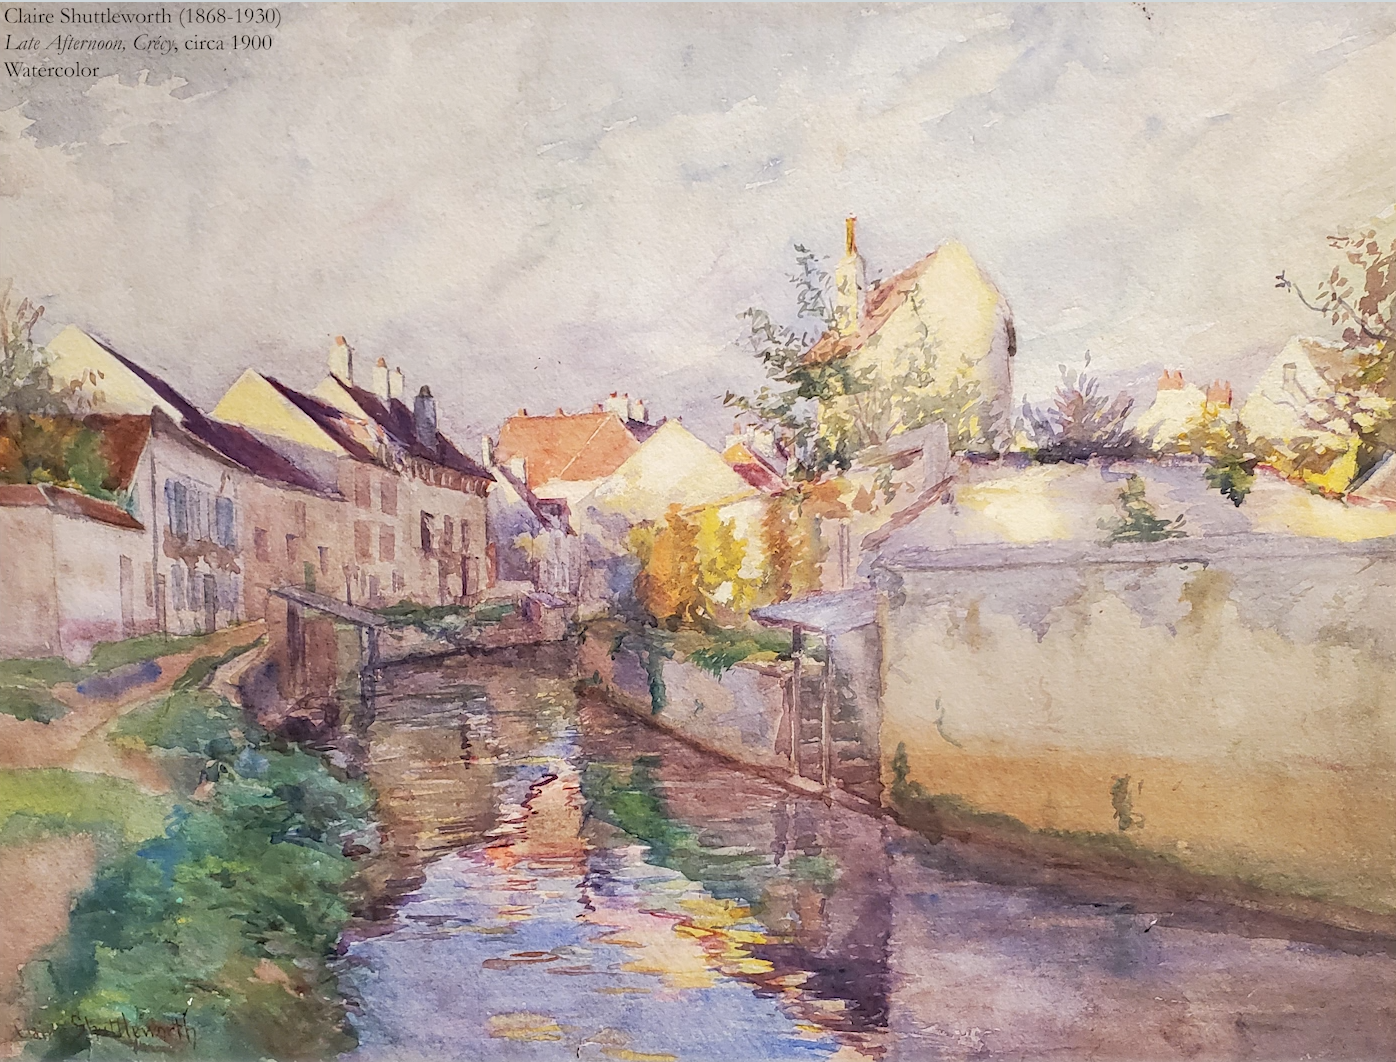 Artwork Spotlight: Late Afternoon, Crécy by Claire Shuttleworth